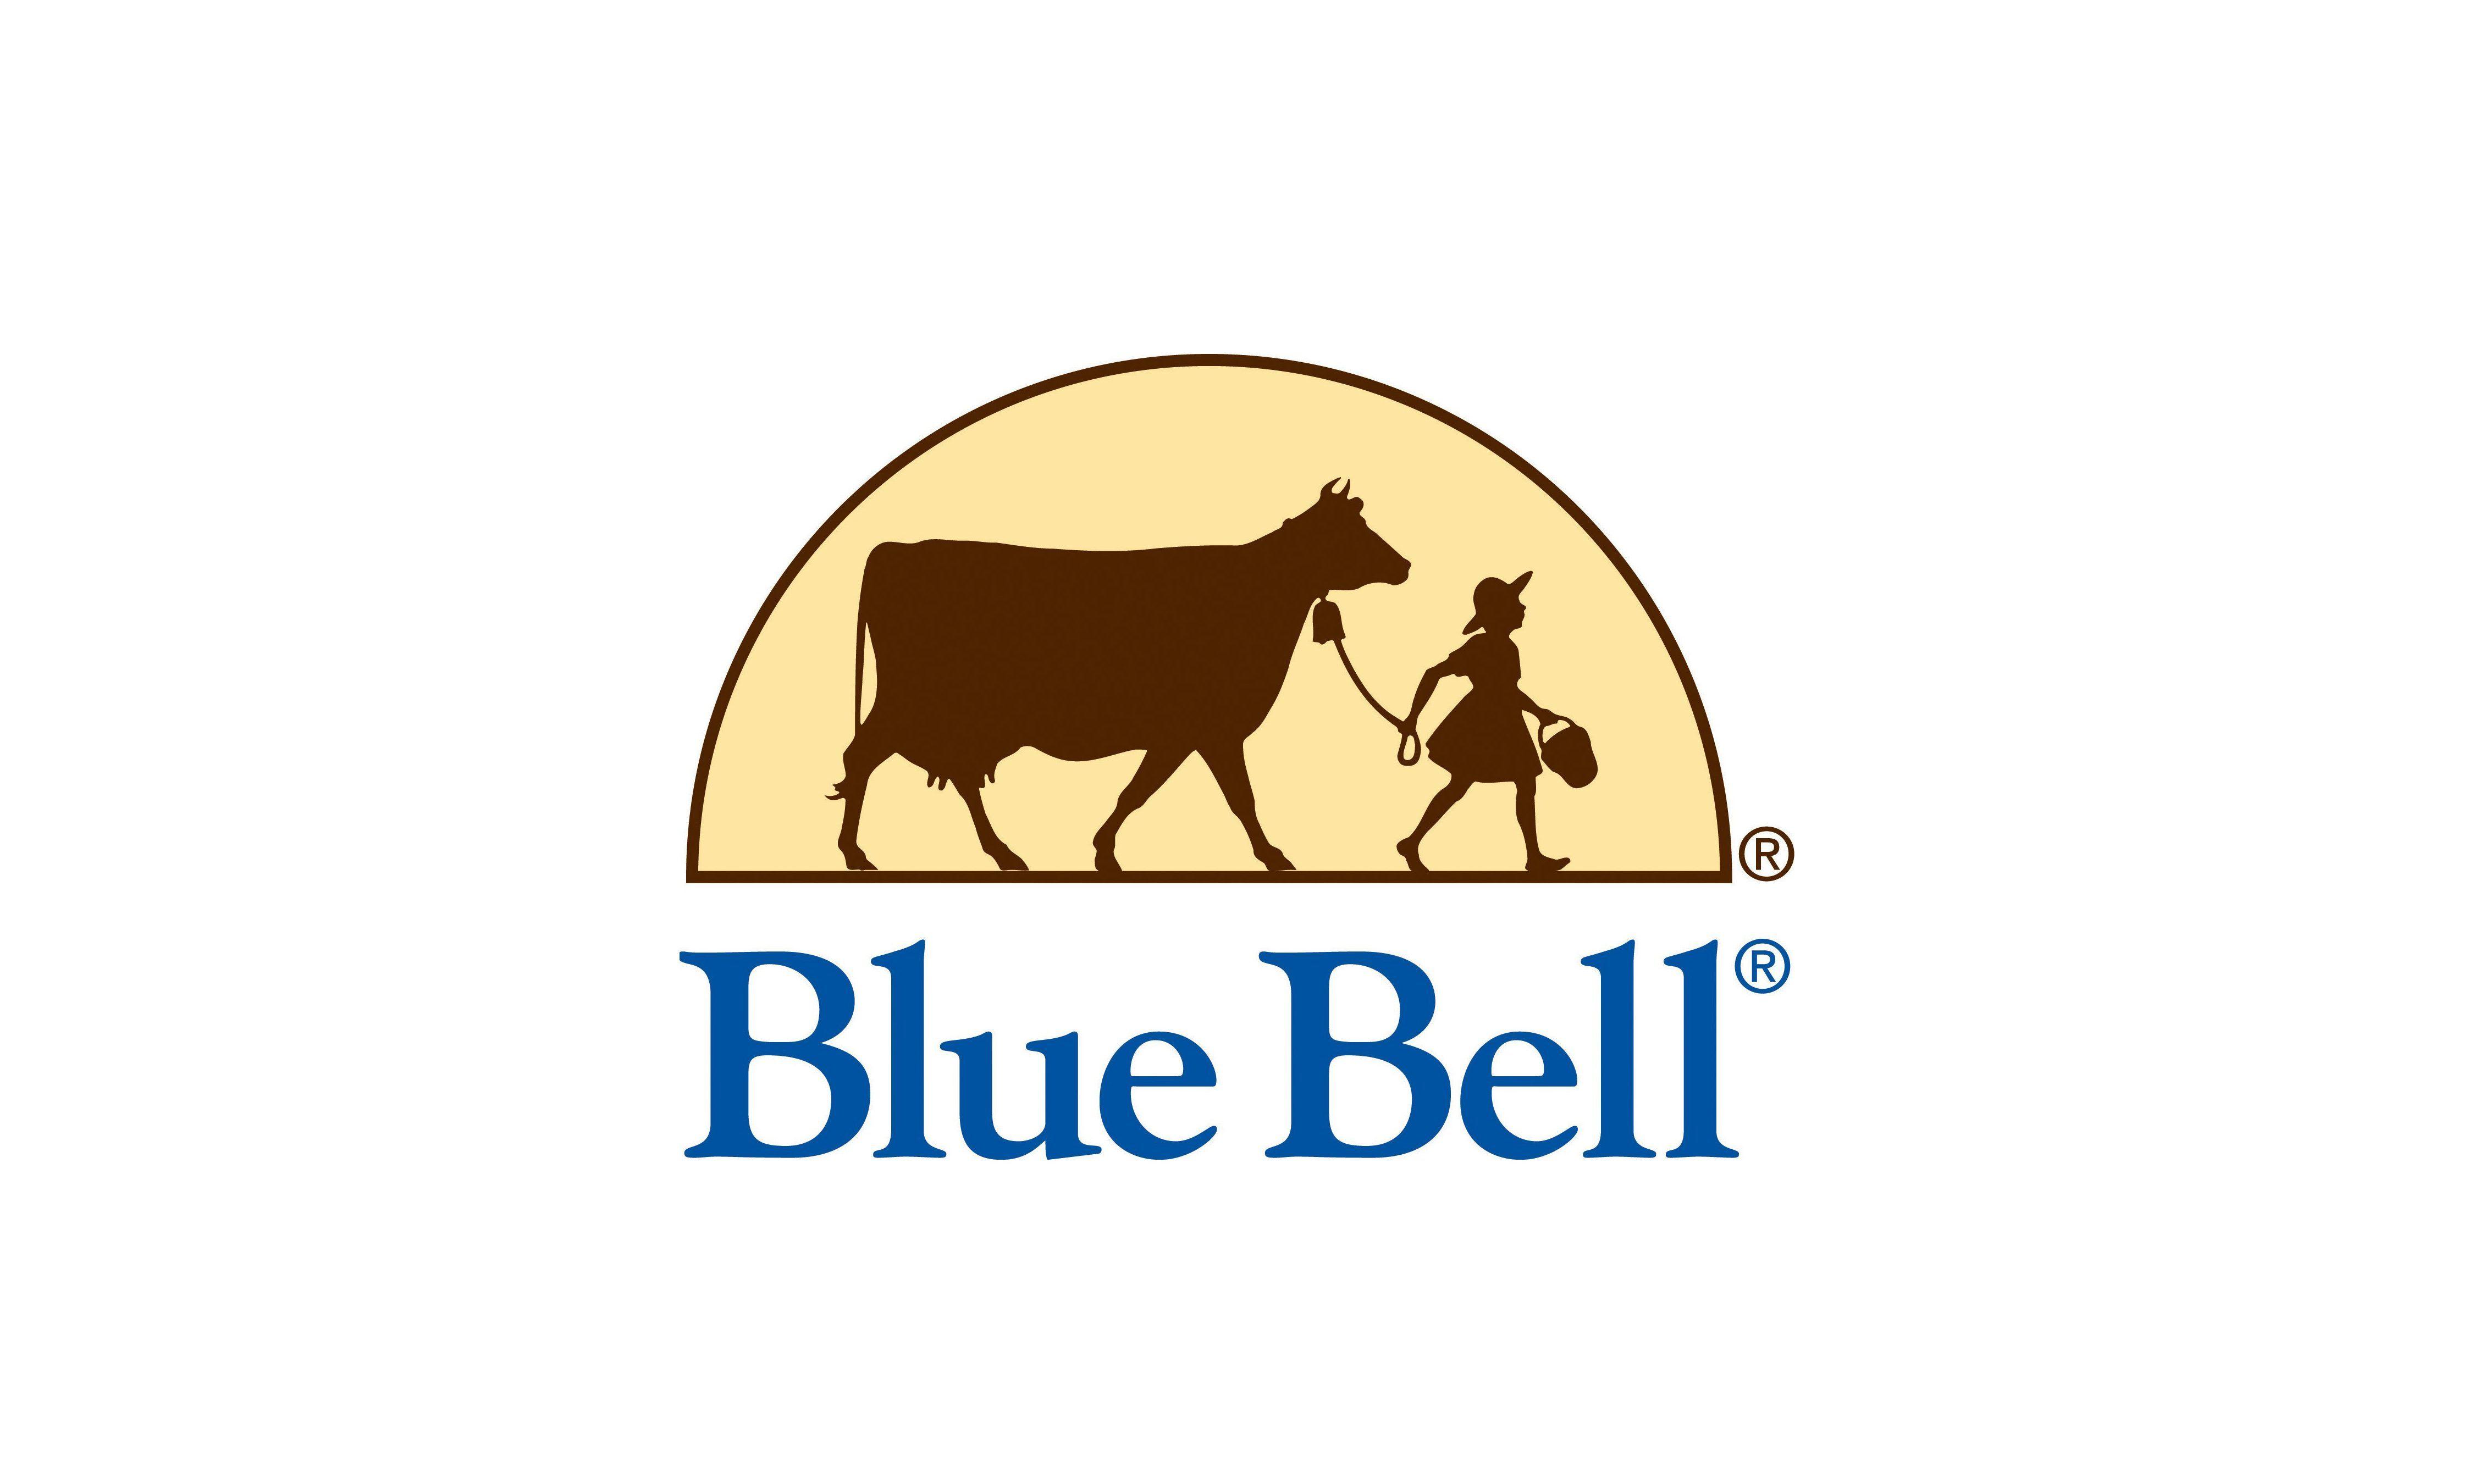 Blue Bell Logo - Blue Bell Ice Cream Reaches Northern New Mexico In Latest Expansion